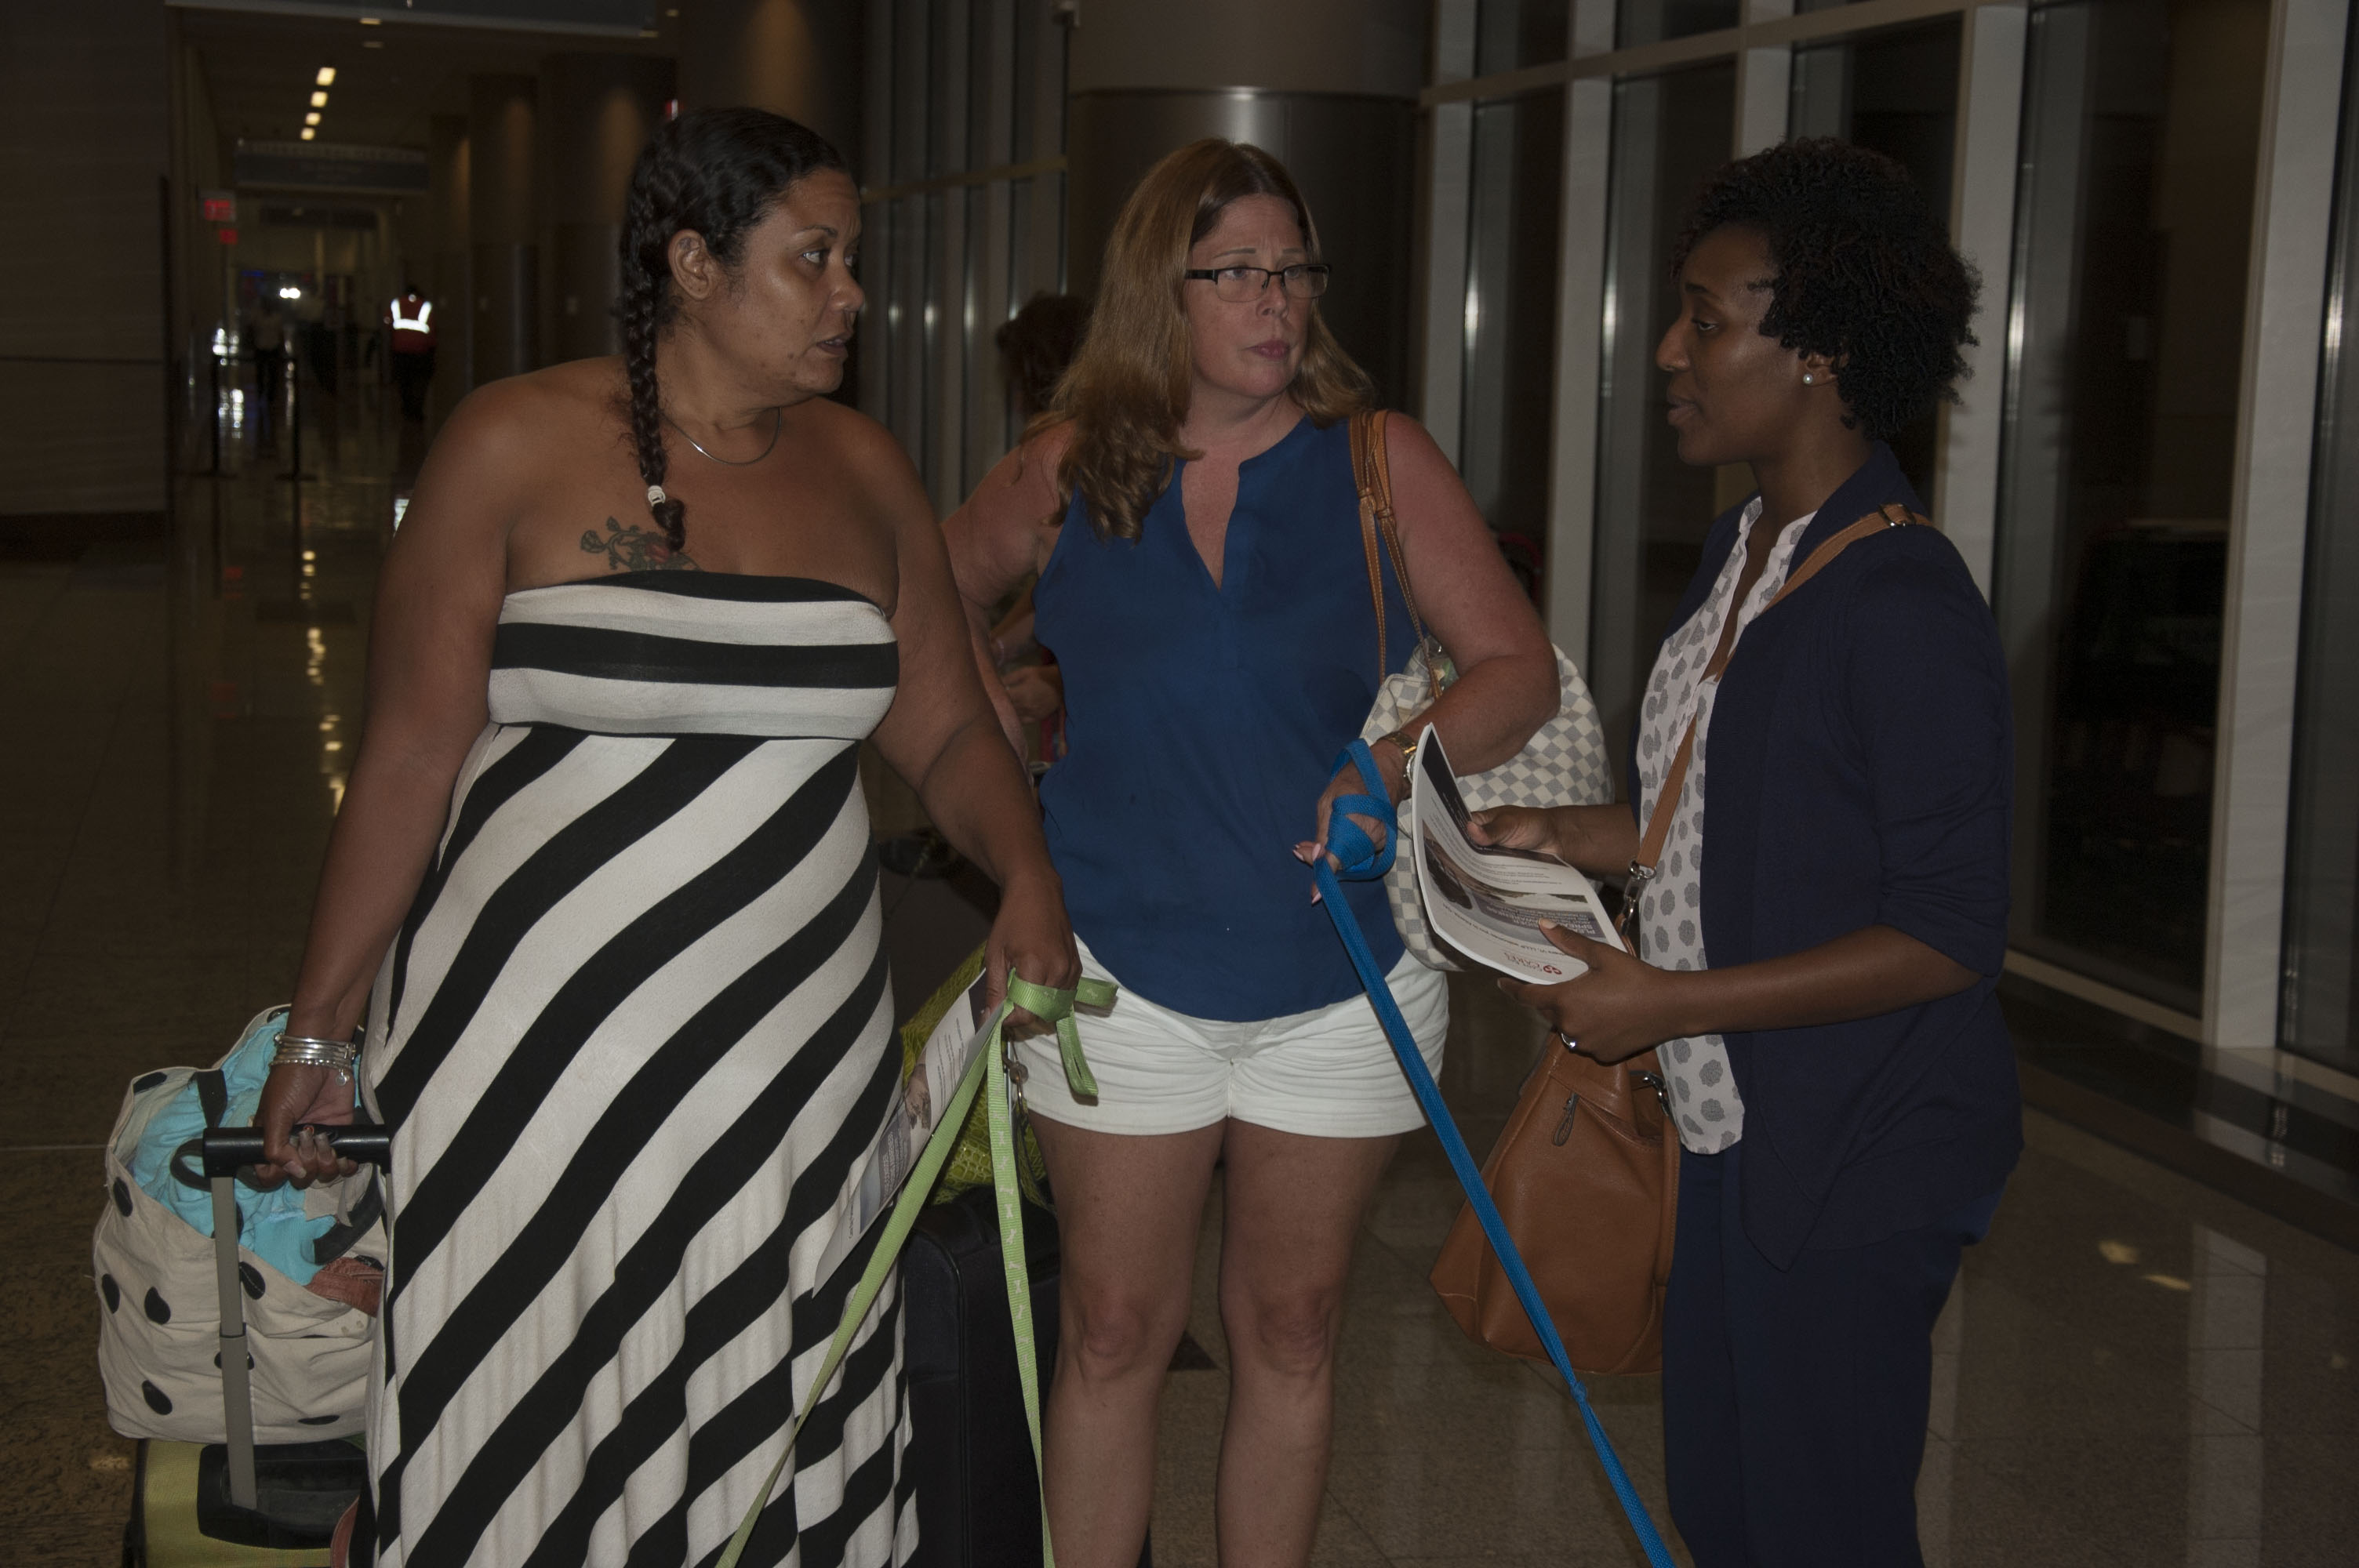 More than 180 people on St. Croix, along with their pets arrived in Atlanta from St. Croix on a 737 plane chartered by Cane Bay Partners VI ahead of the official resumption of commercial air traffic t